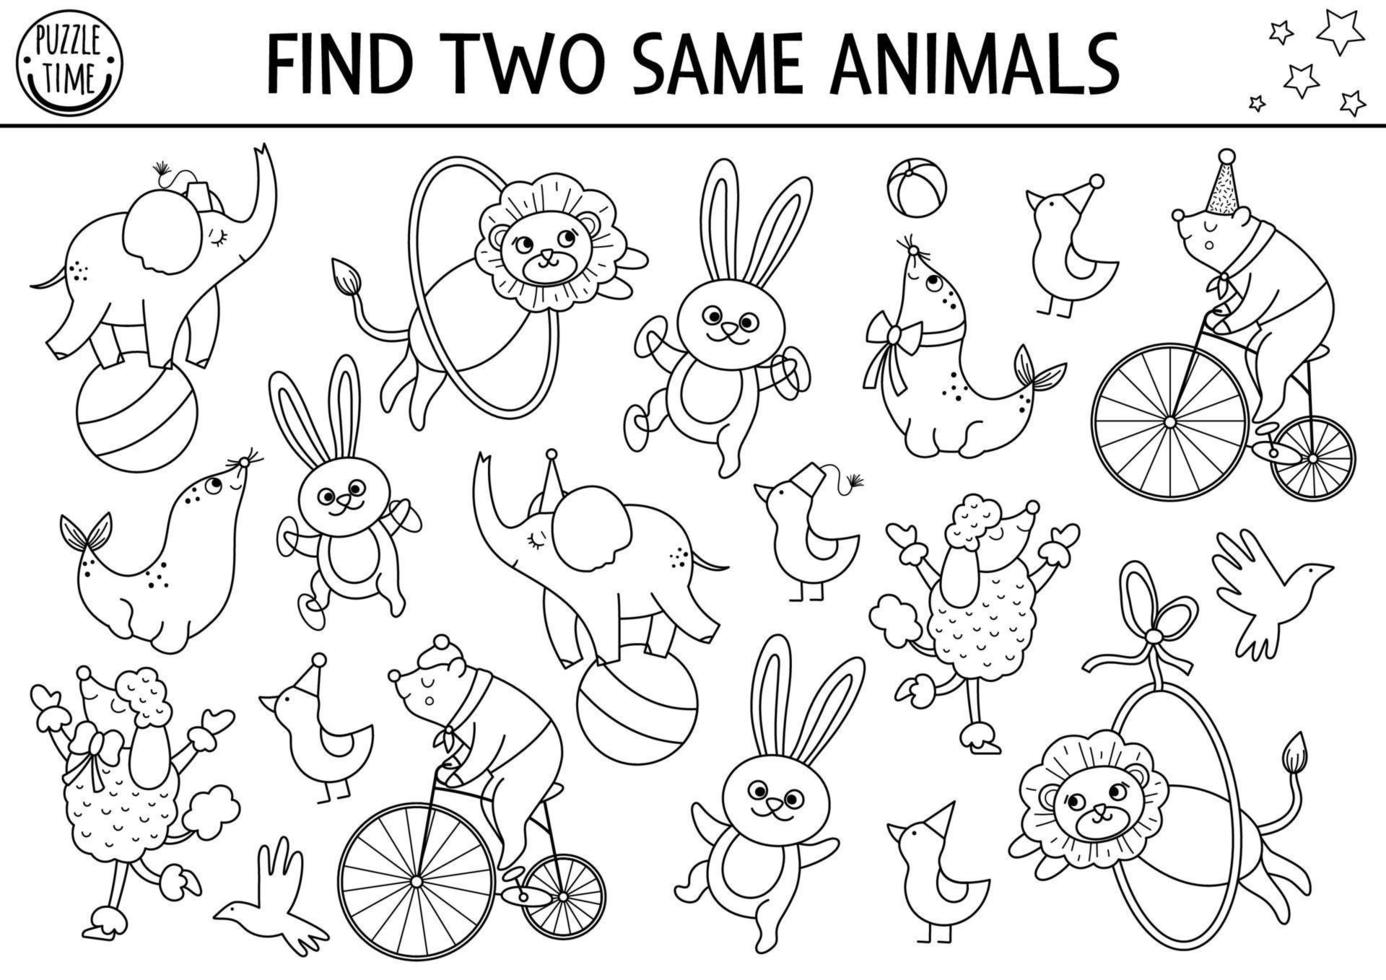 Find two same circus animals. black and white matching activity for children. Amusement show educational line quiz worksheet for kids. Simple printable game or coloring page vector